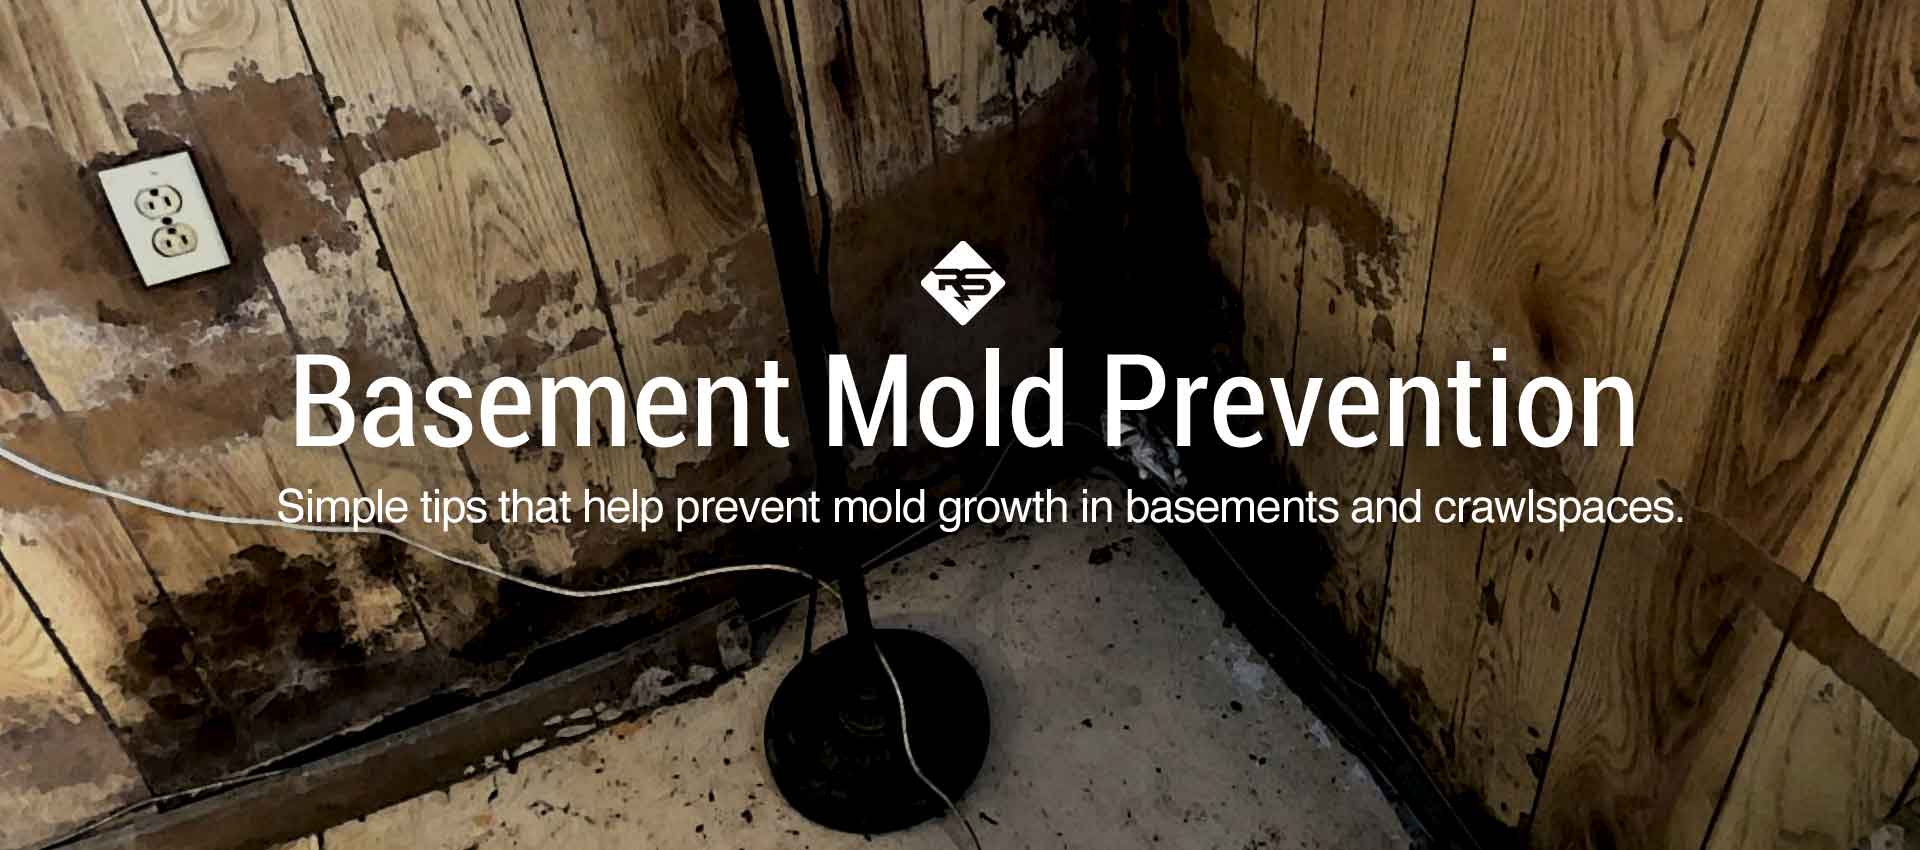 Basement Mold Prevention. Simple Tips that help prevent mold growth in basements and crawlspaces.